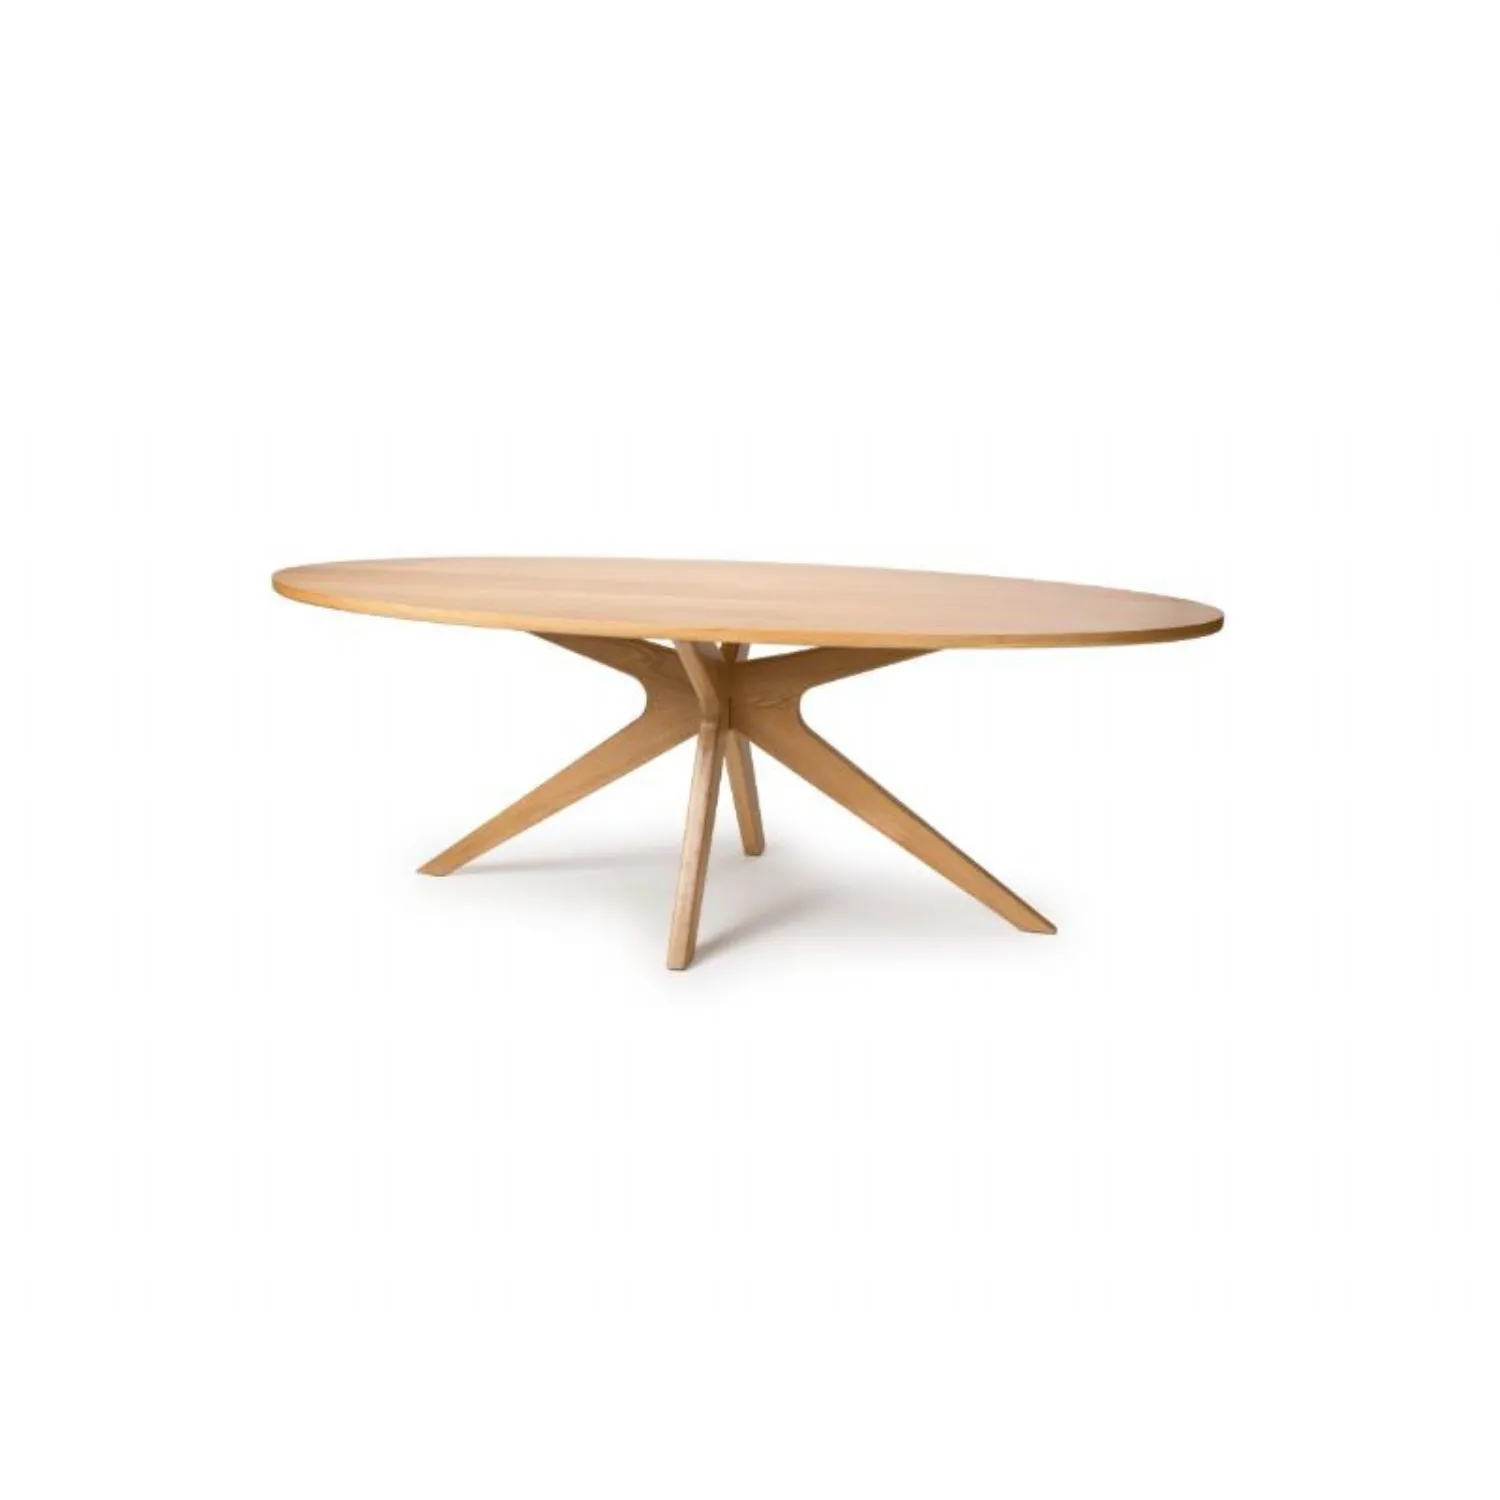 Hoxton Oval Table 2000mm